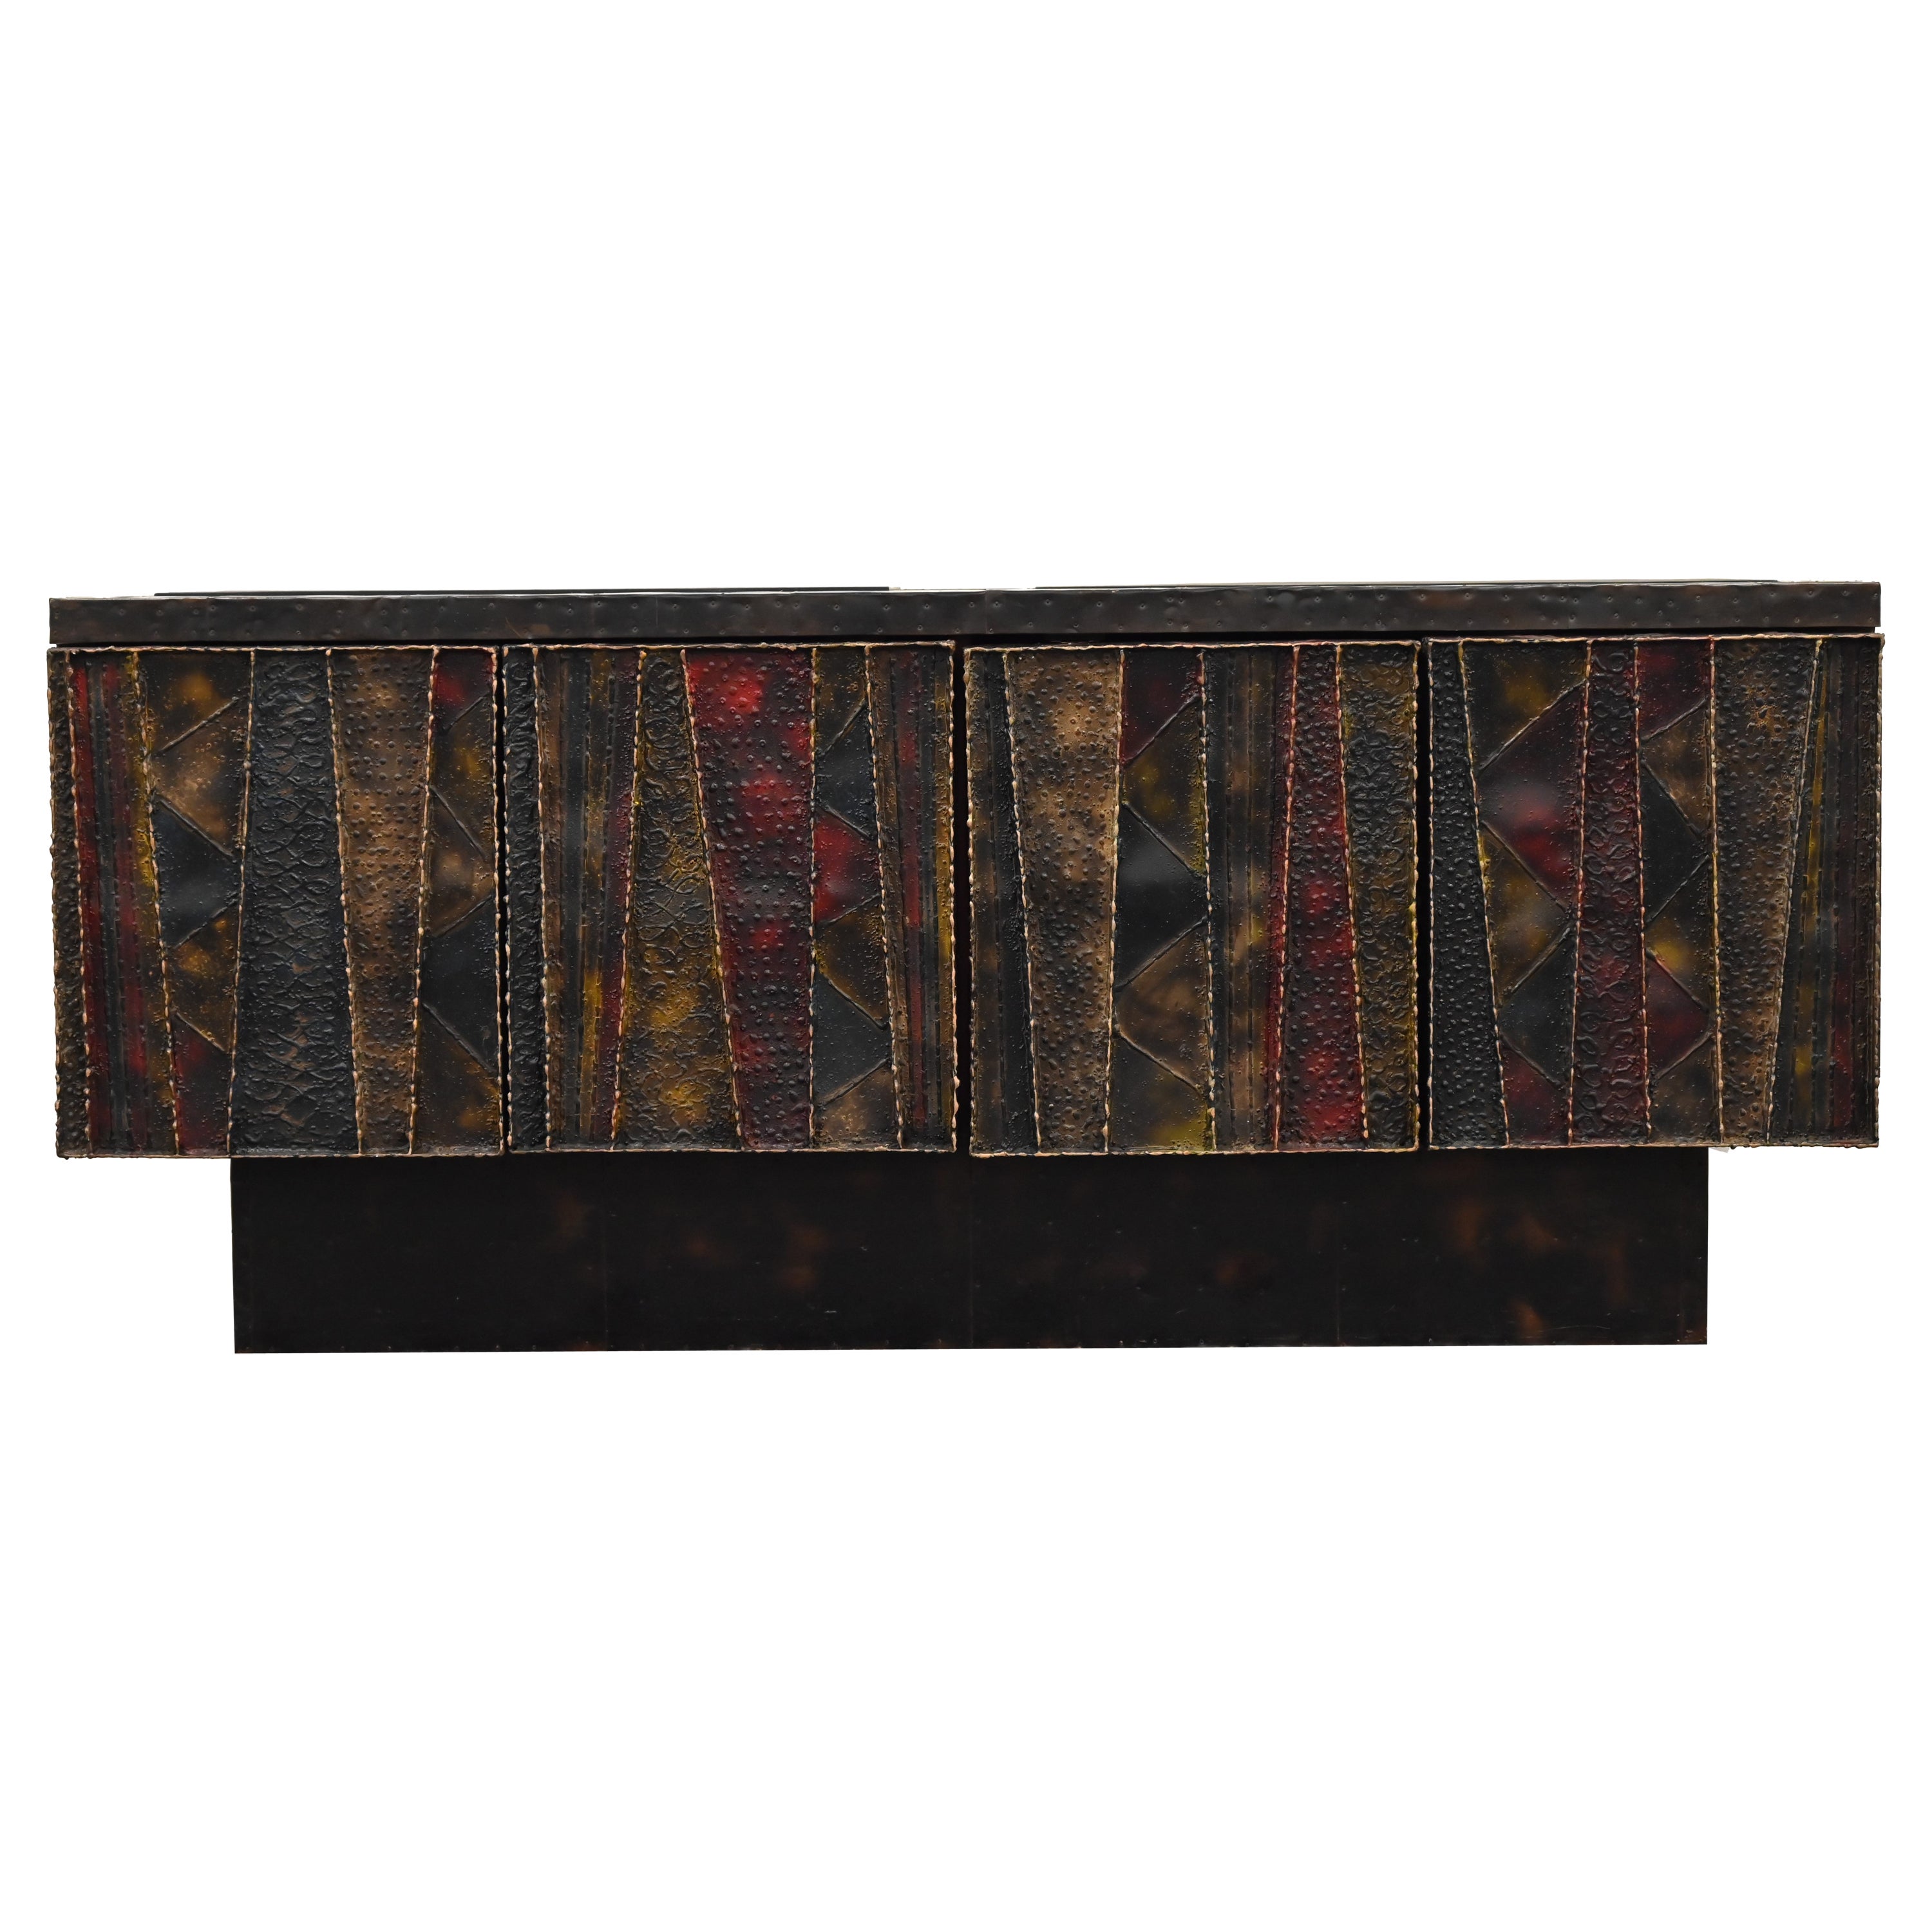 "Deep Relief Credenza" by Paul Evans Signed and Dated, 1972 For Sale